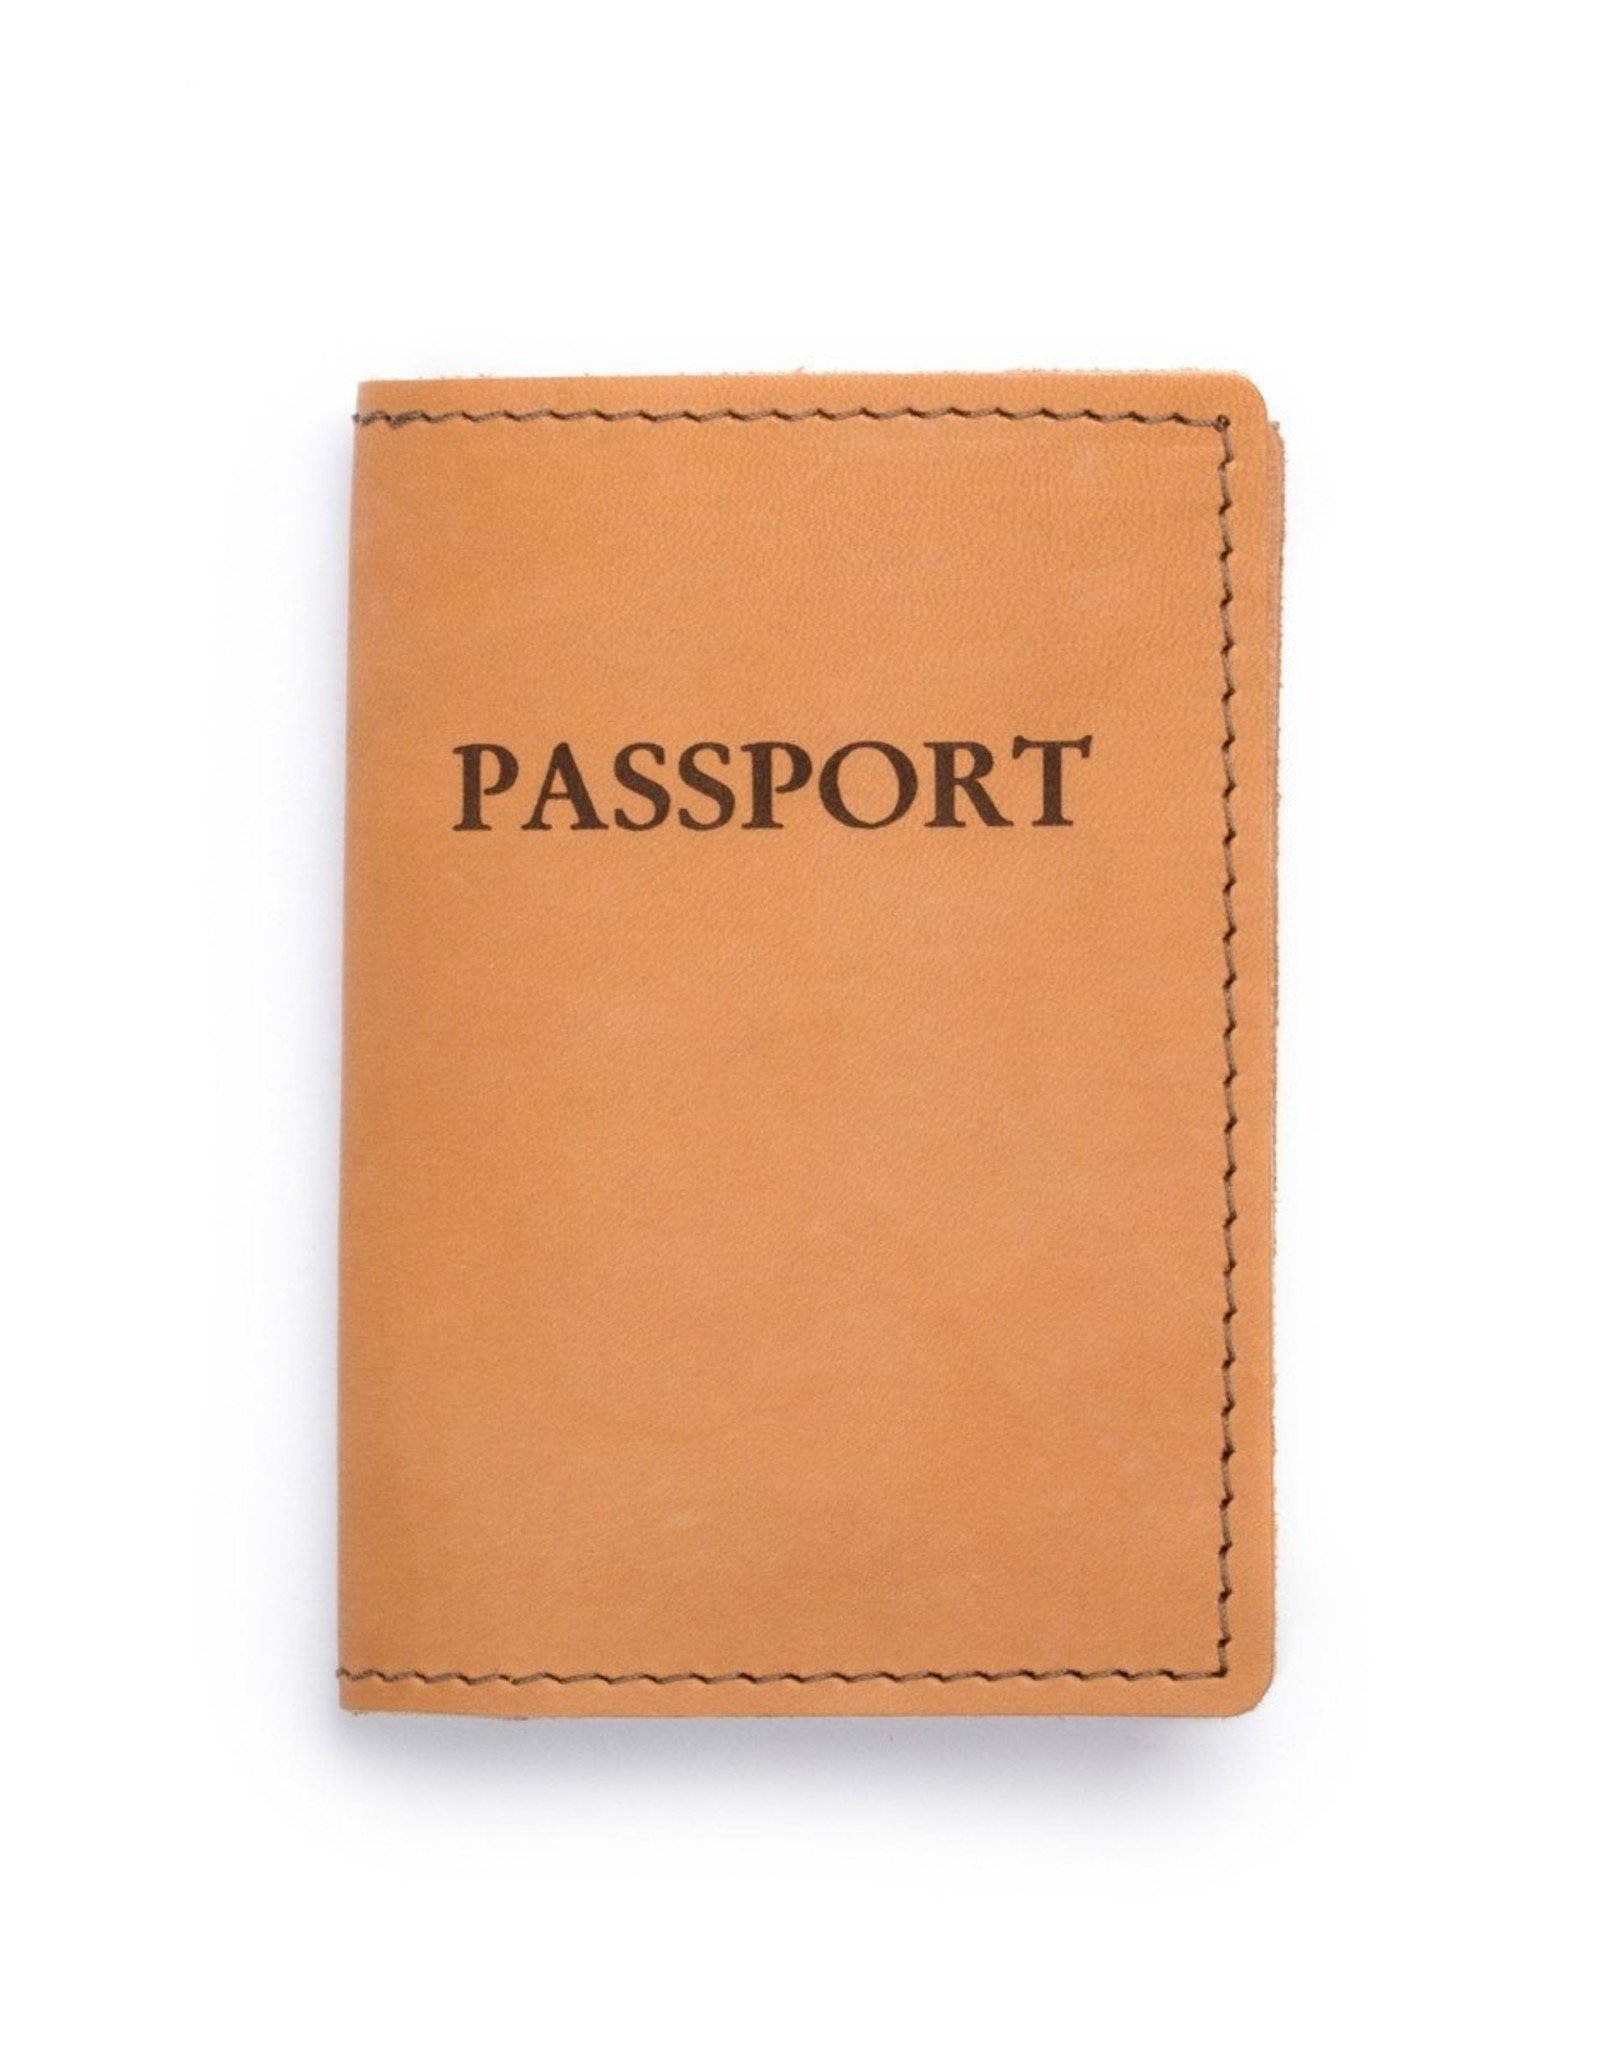 Rustico Leather Passport Covers by Rustico